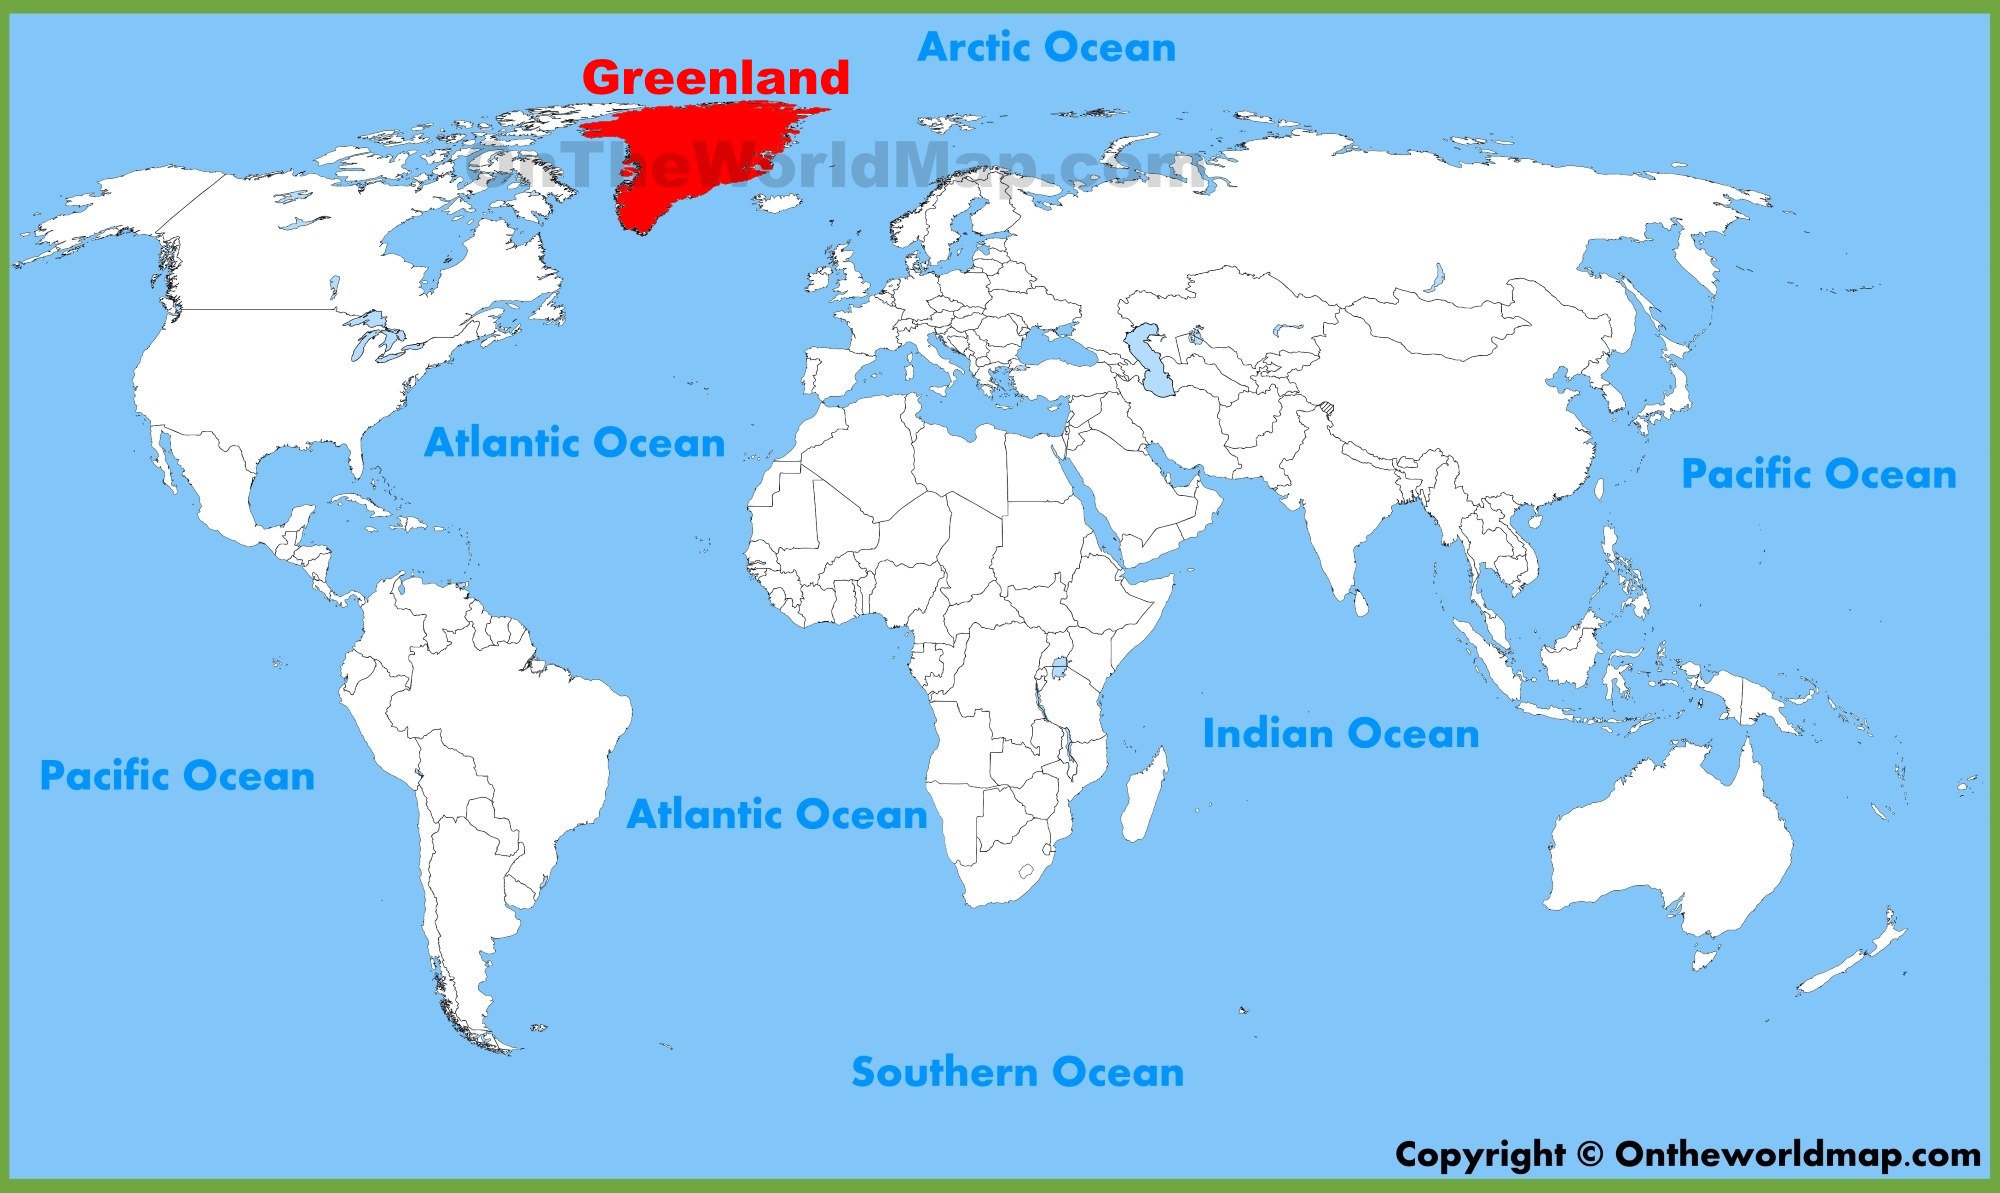 greenland-location-on-the-world-map